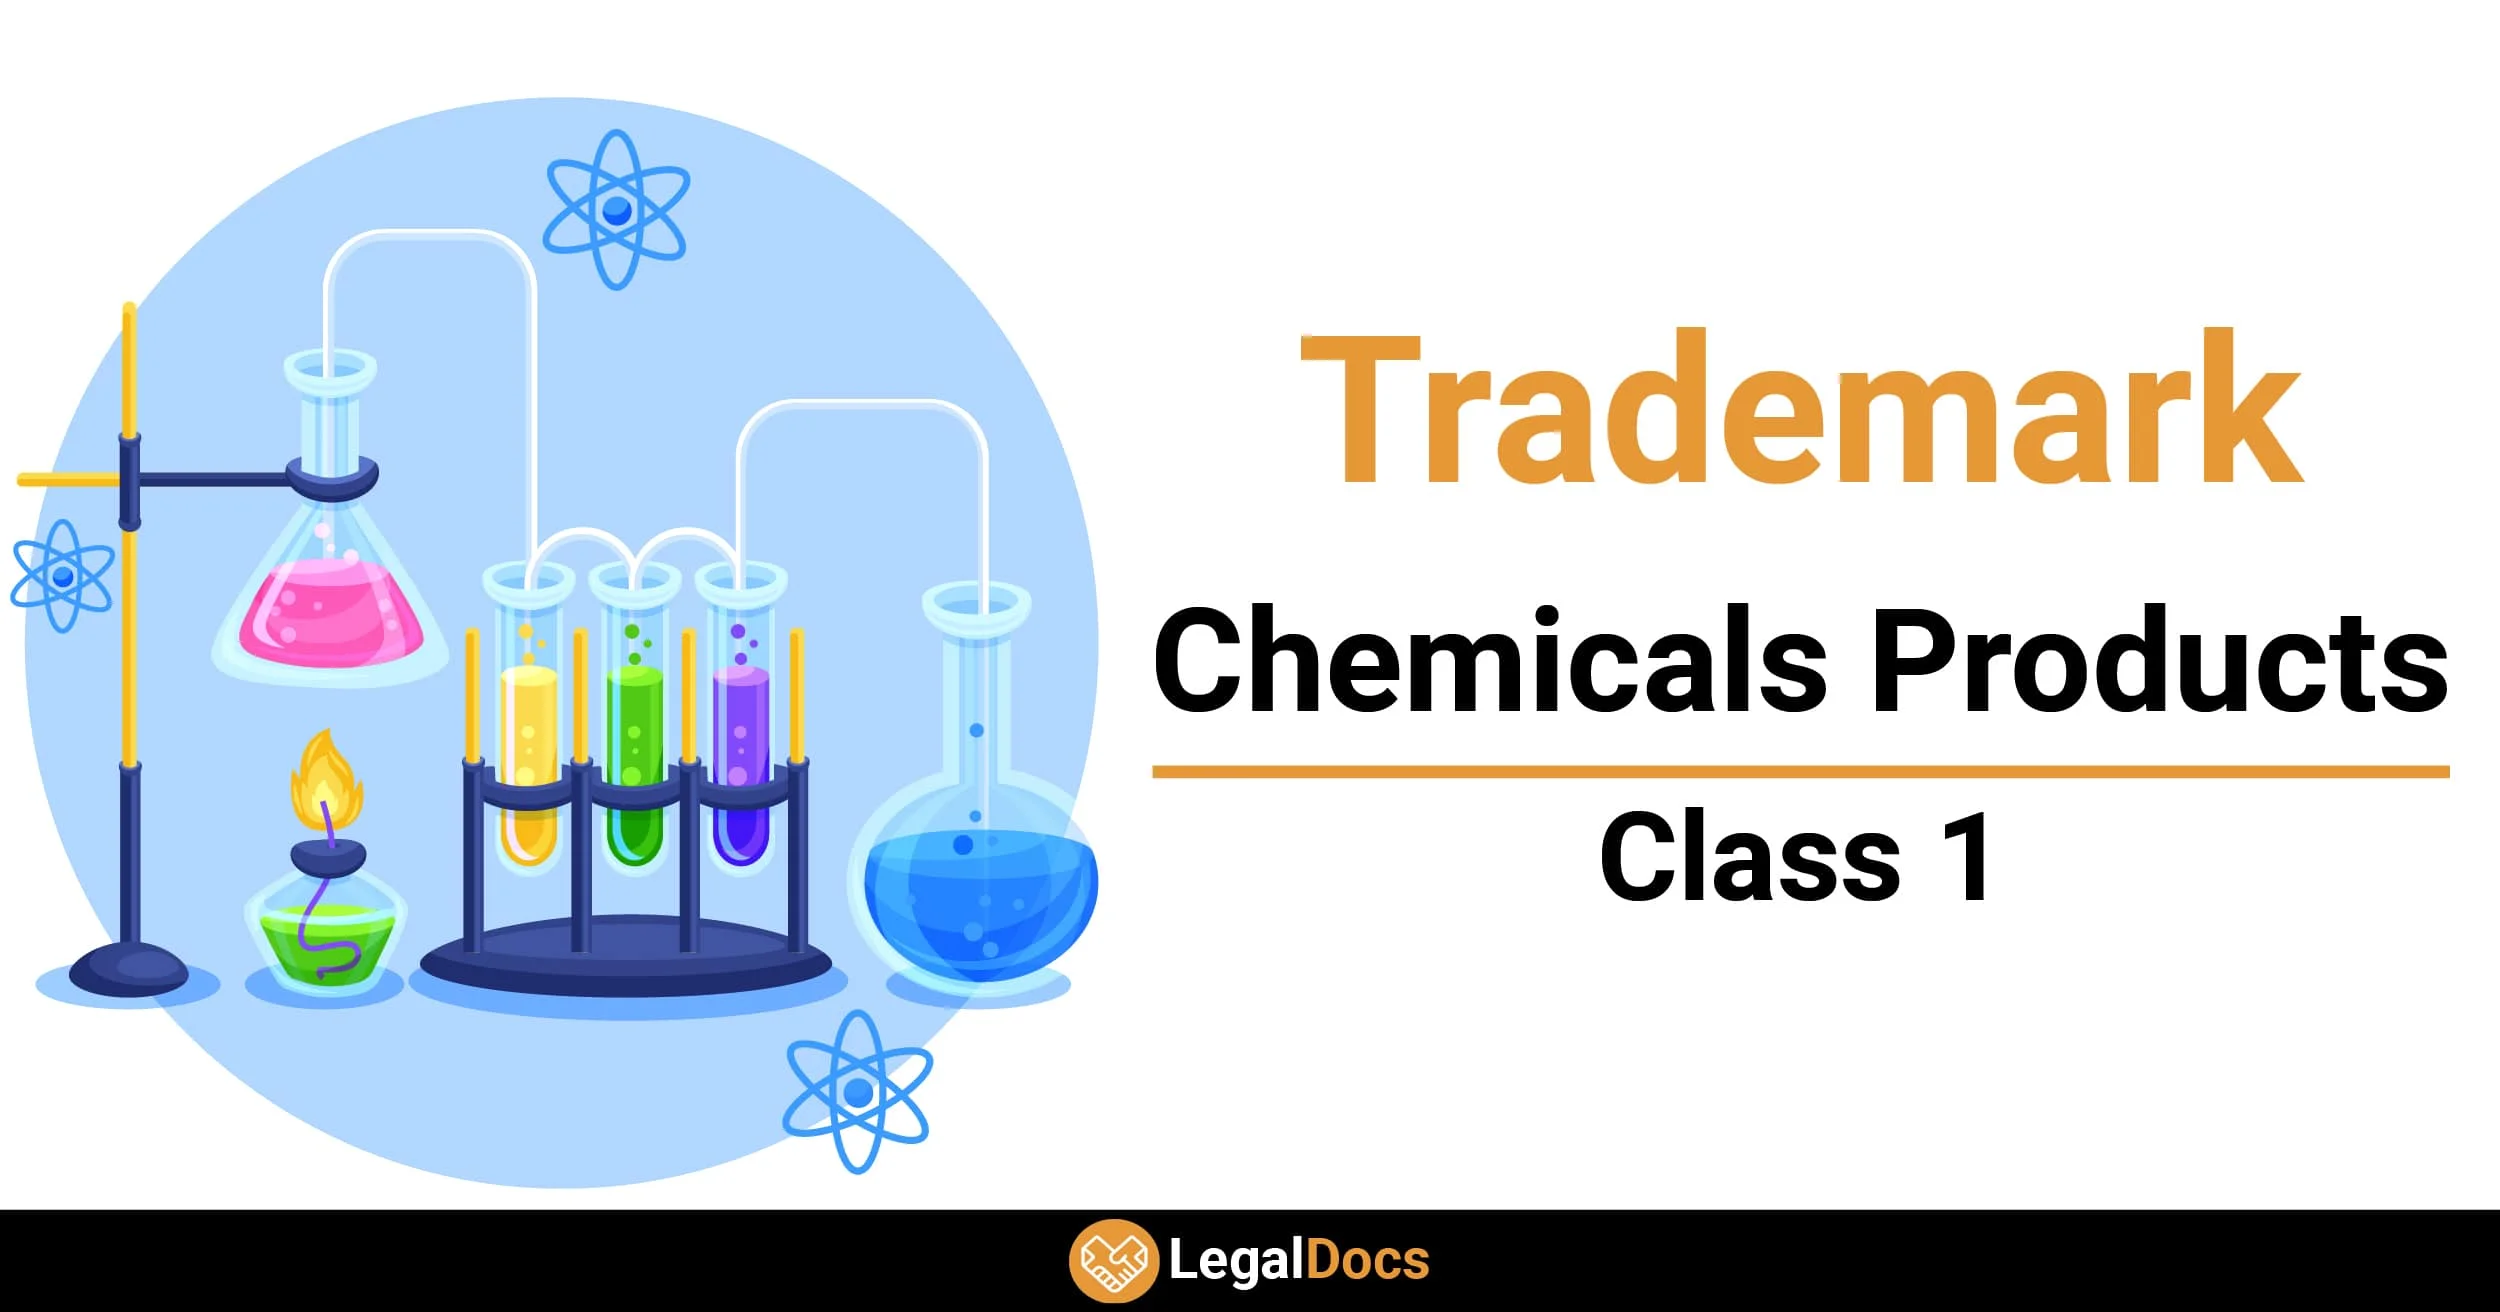 Trademark Class 1 - Chemical Products - LegalDocs